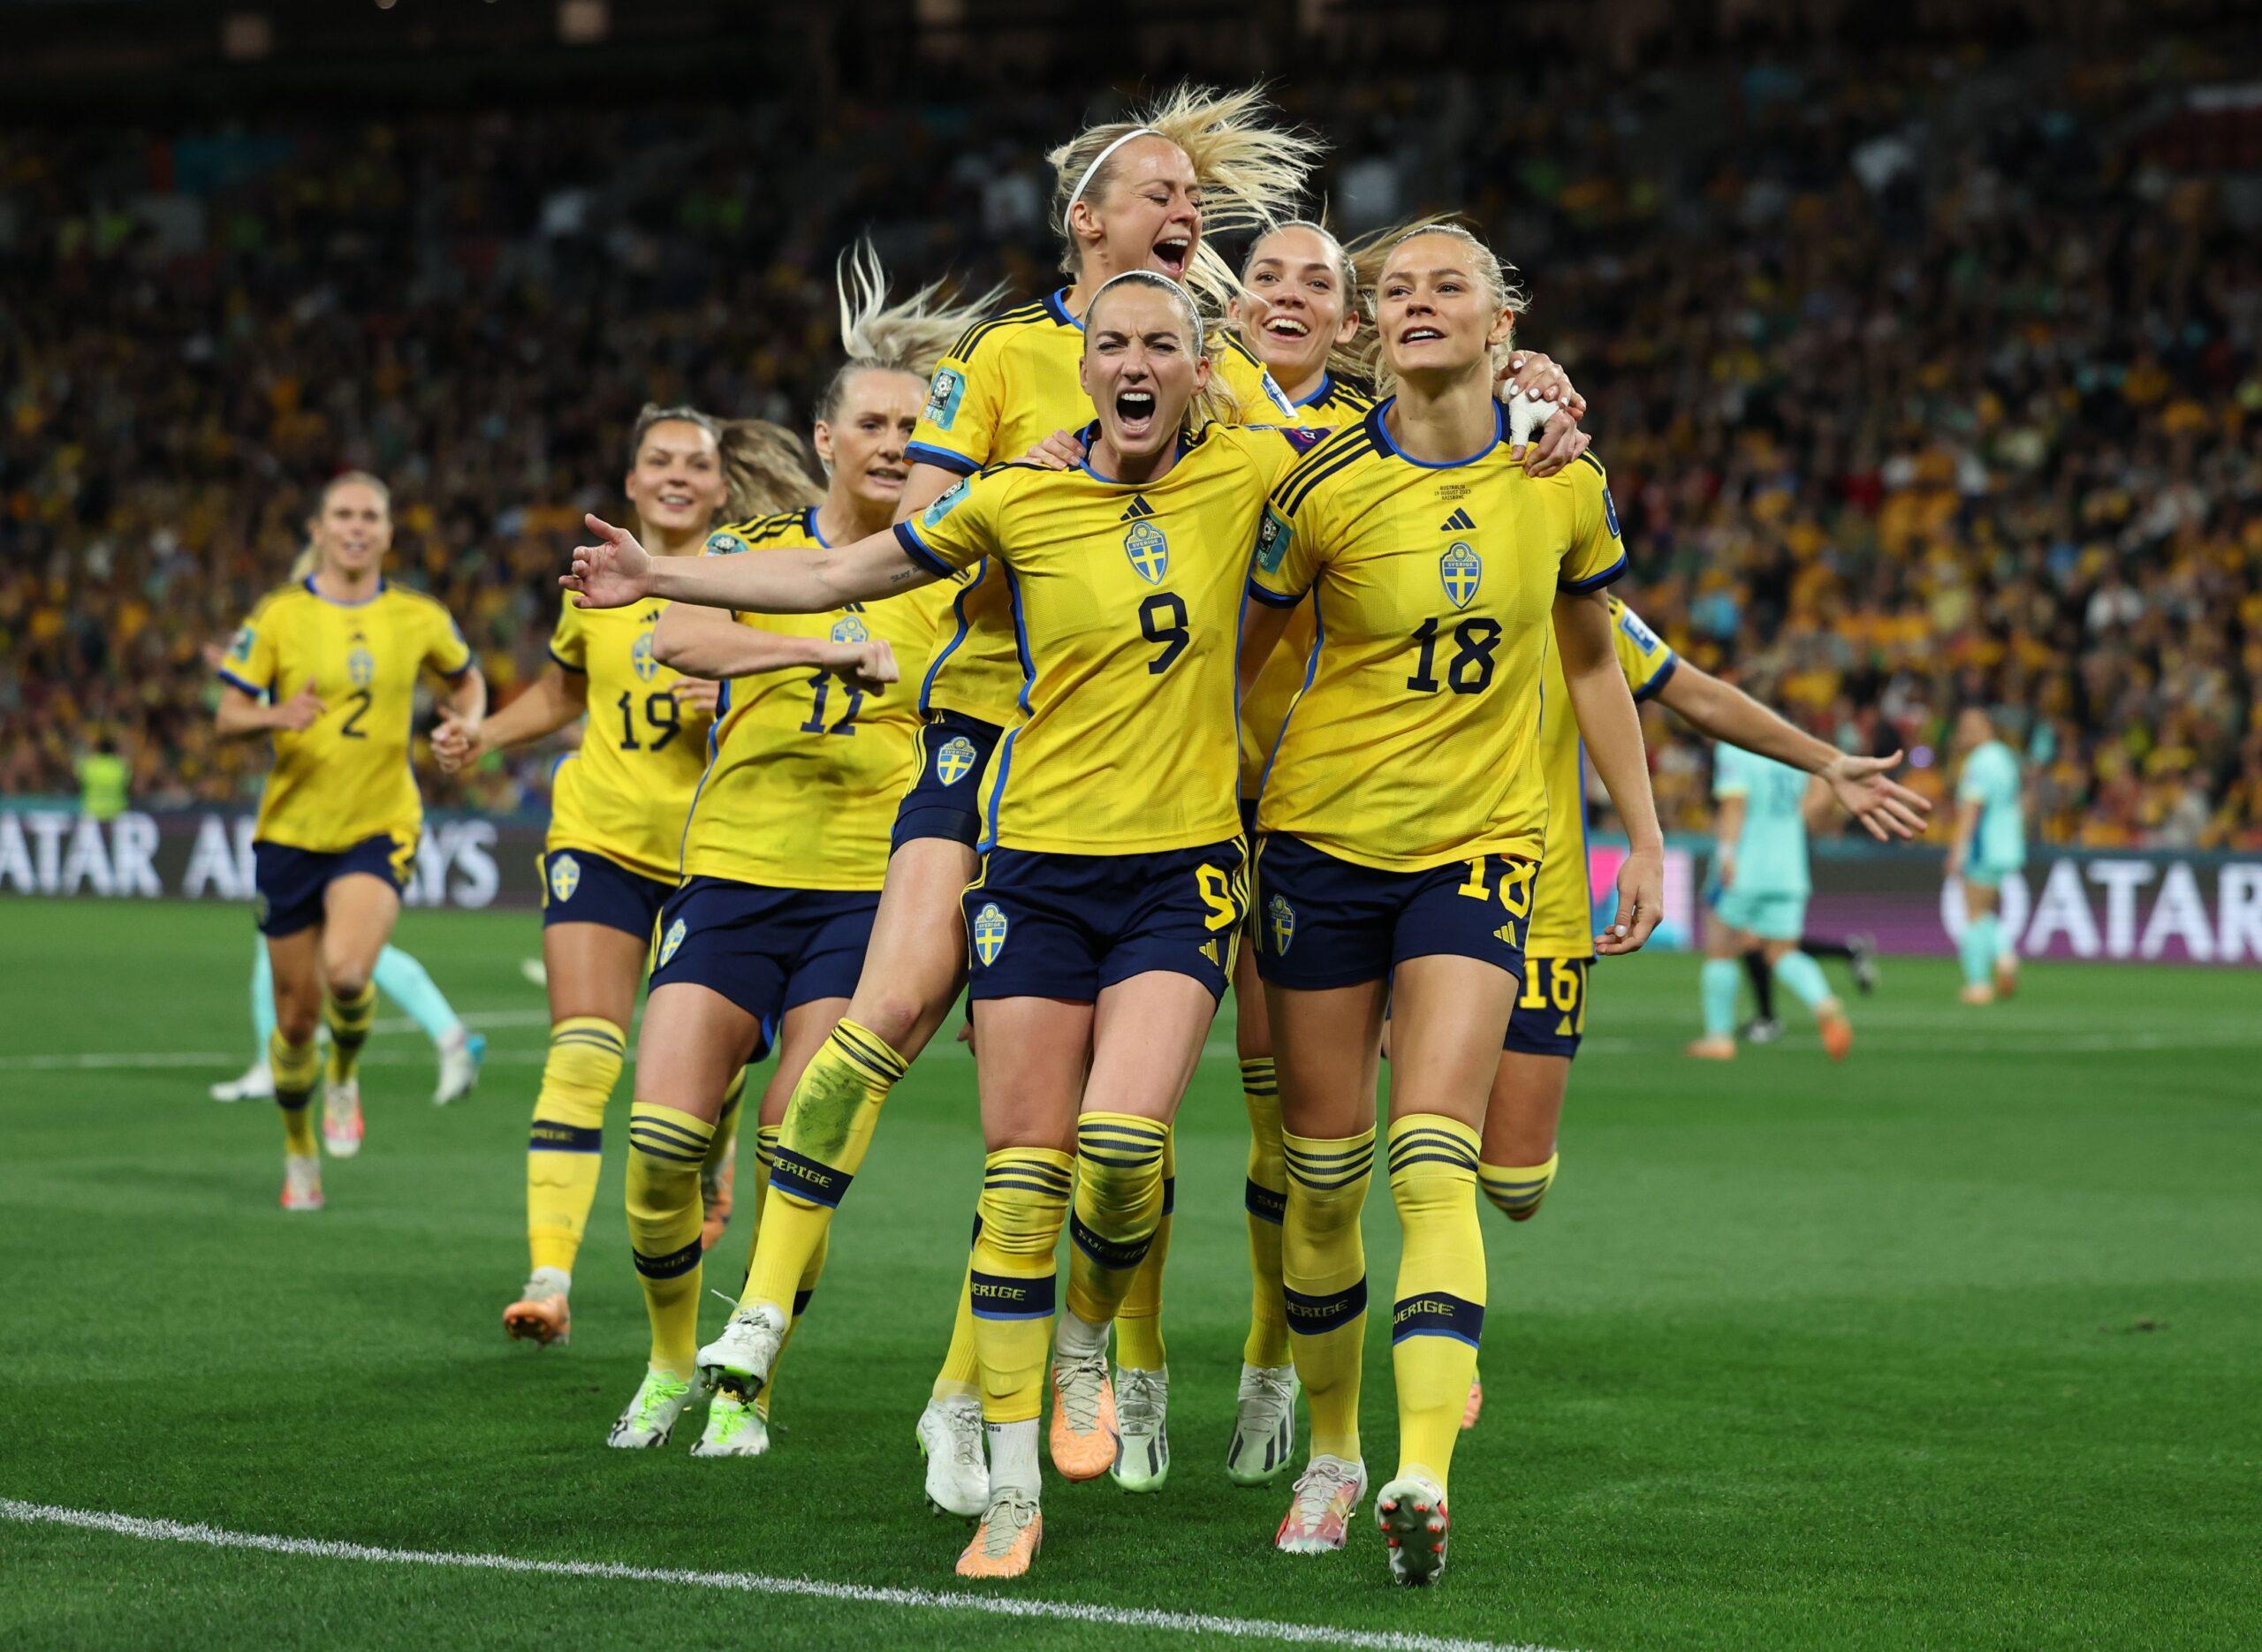 Some of the happy players in the Swedish women's football team after winning the bronze medal at the World Cup 2023.